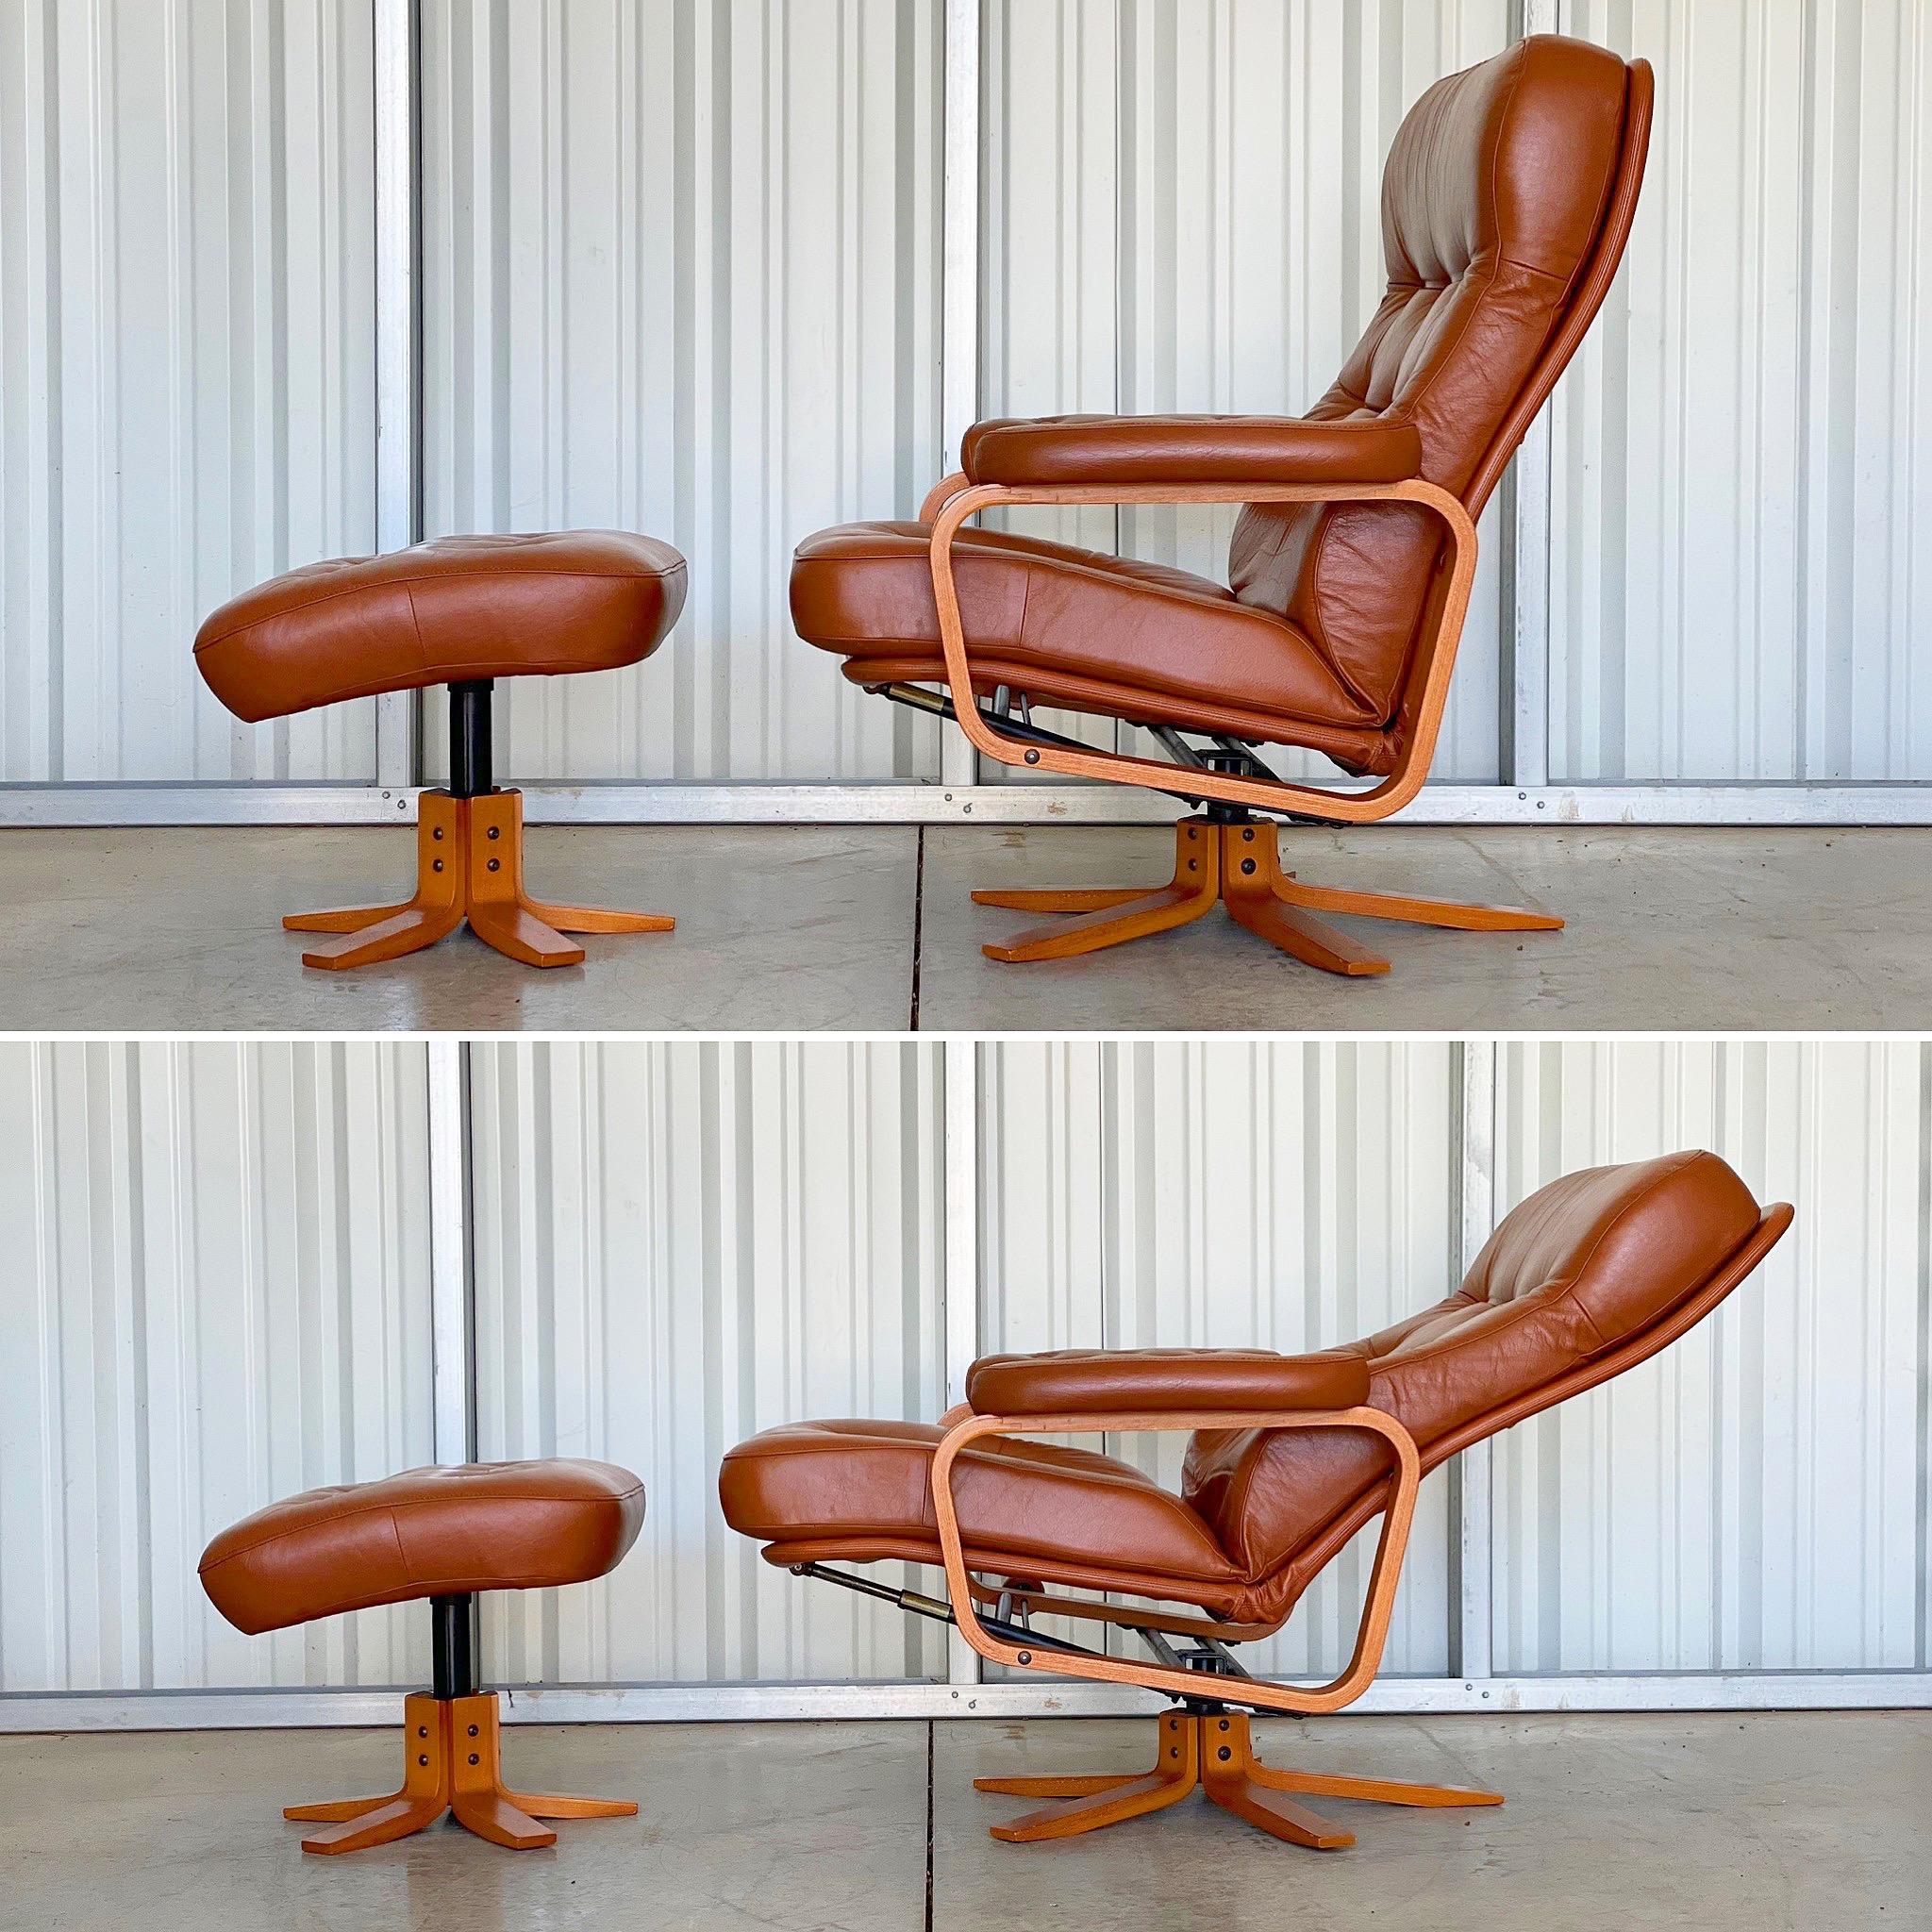 Danish modern reclining lounge chair and ottoman in teak and cognac toned leather by Svend Skipper for Skippers Mobler. Chair reclines almost flat. Tension dial allows the user to hold the recline anywhere on the recline plane. Supreme comfort and